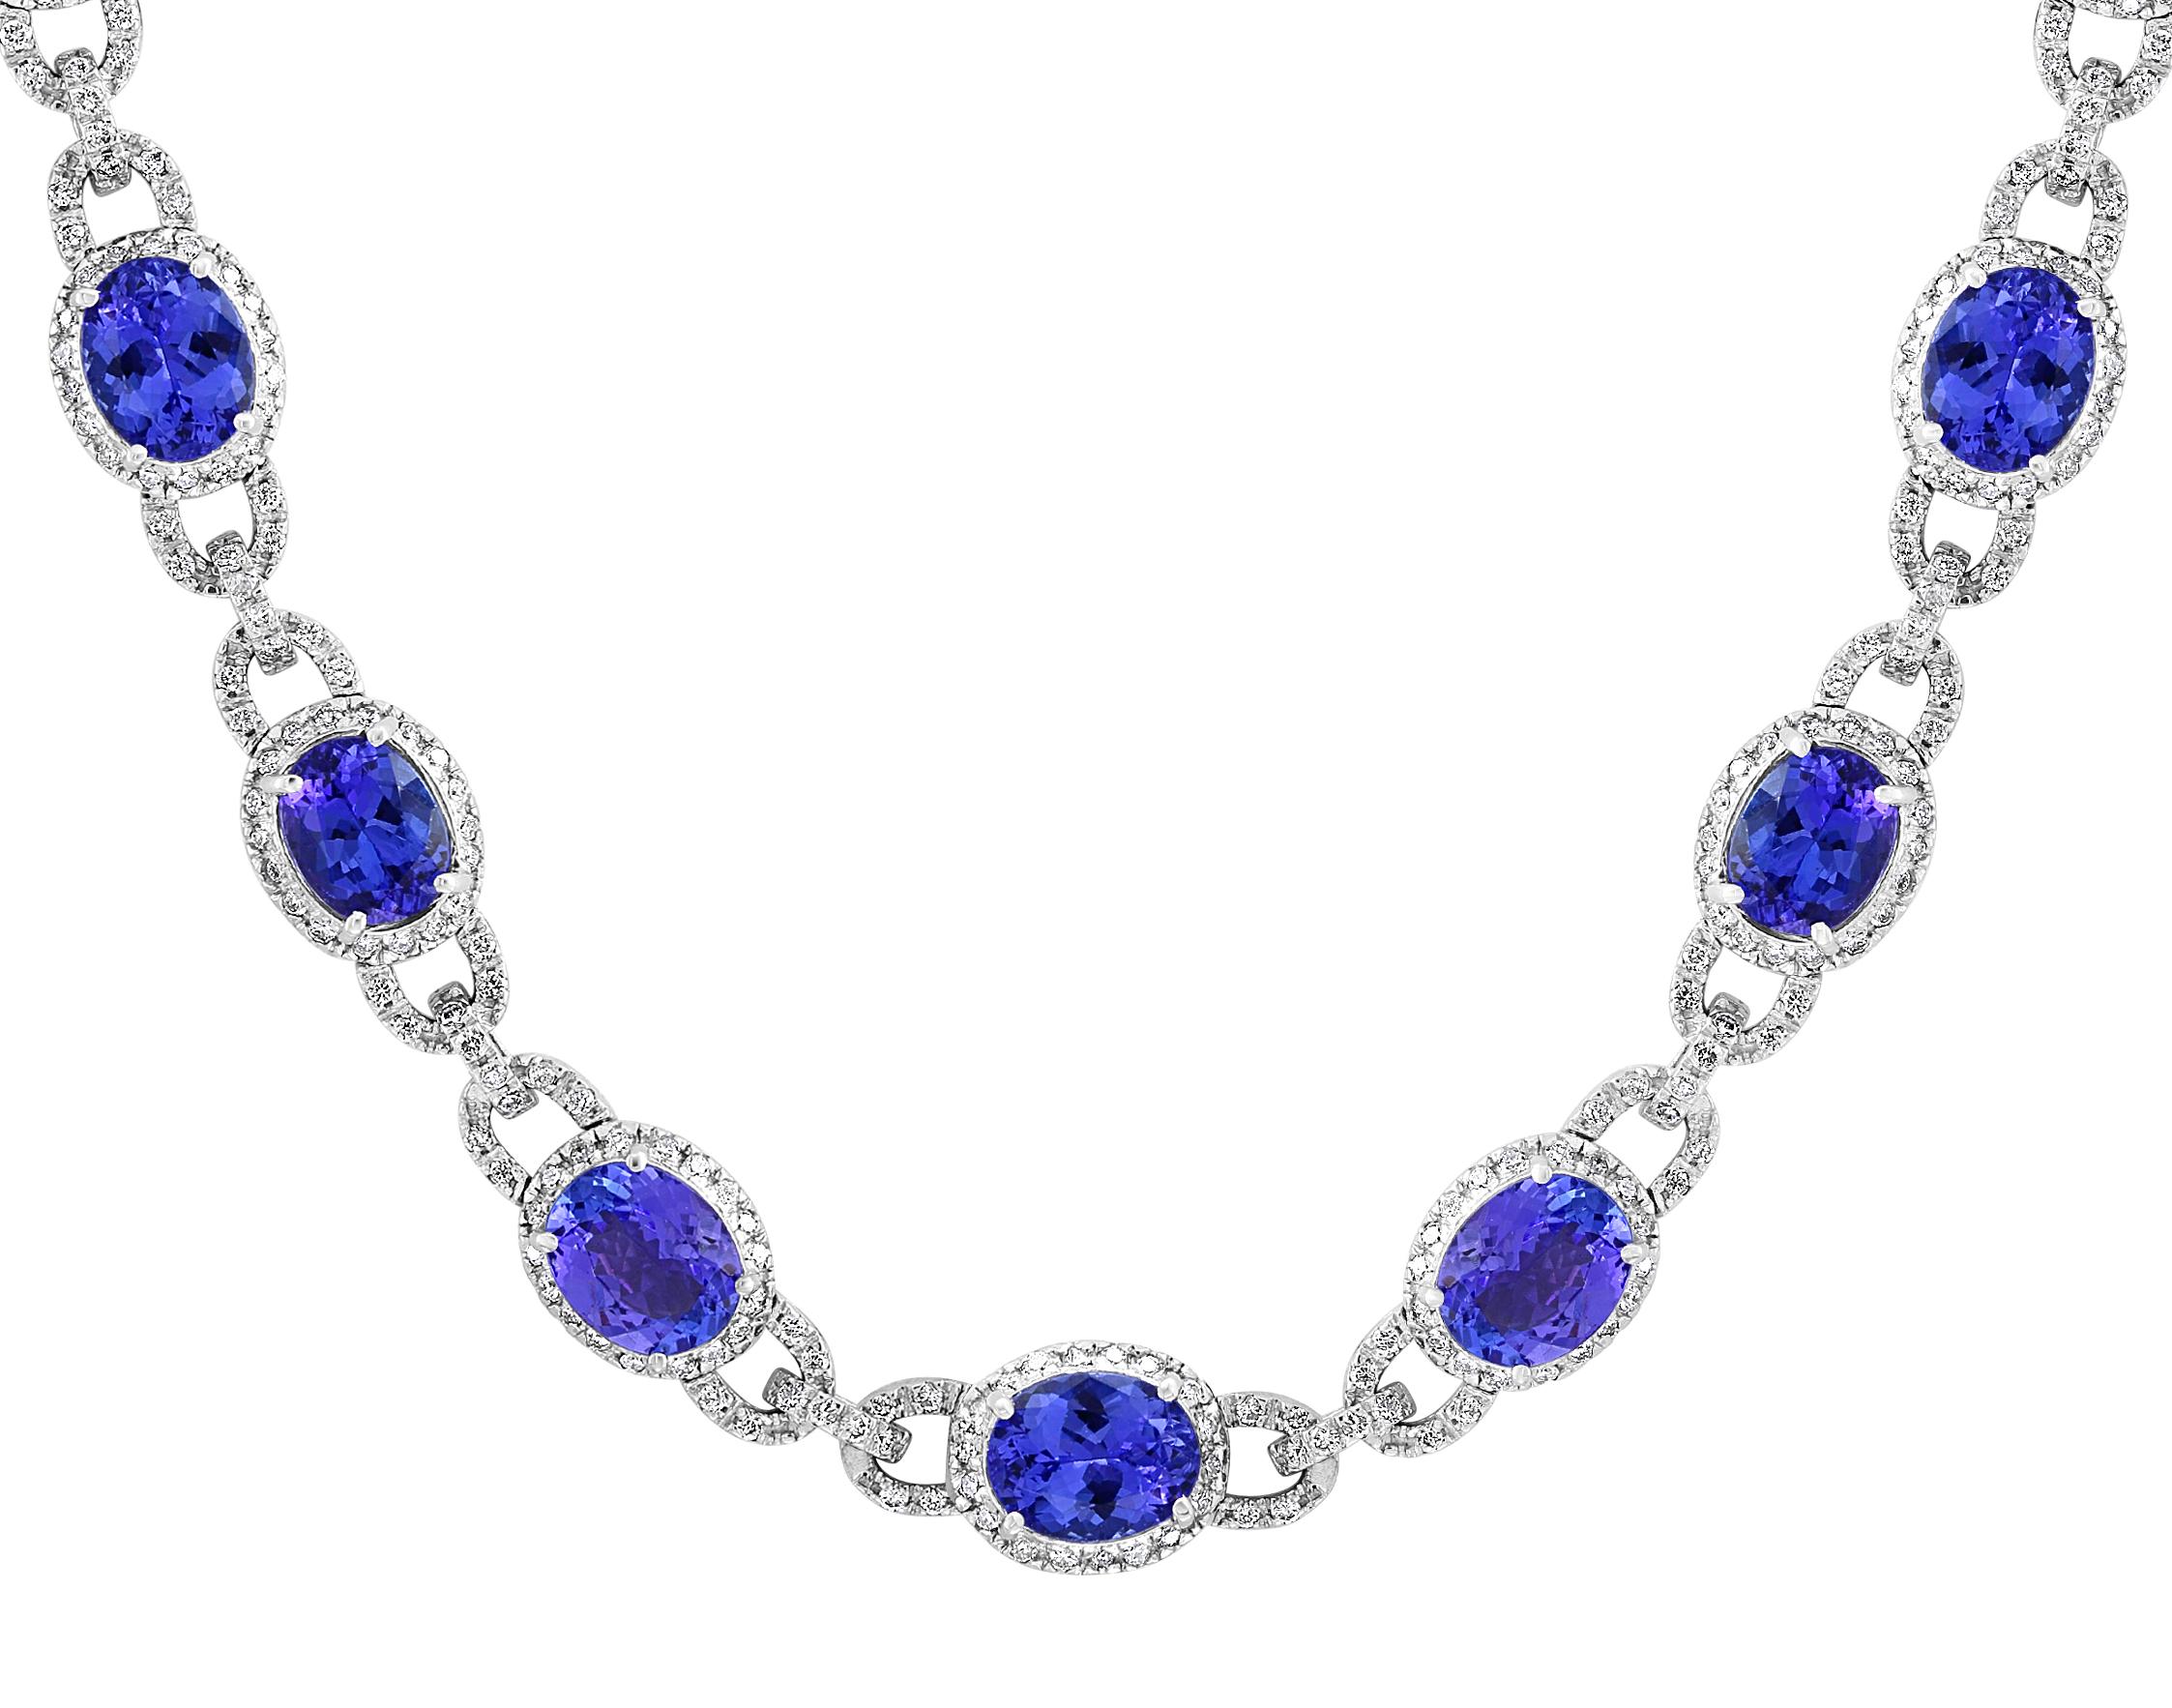 47 Carat Oval Tanzanite and 8 Carat Diamonds Necklace 18 Karat White Gold Estate In Excellent Condition For Sale In New York, NY